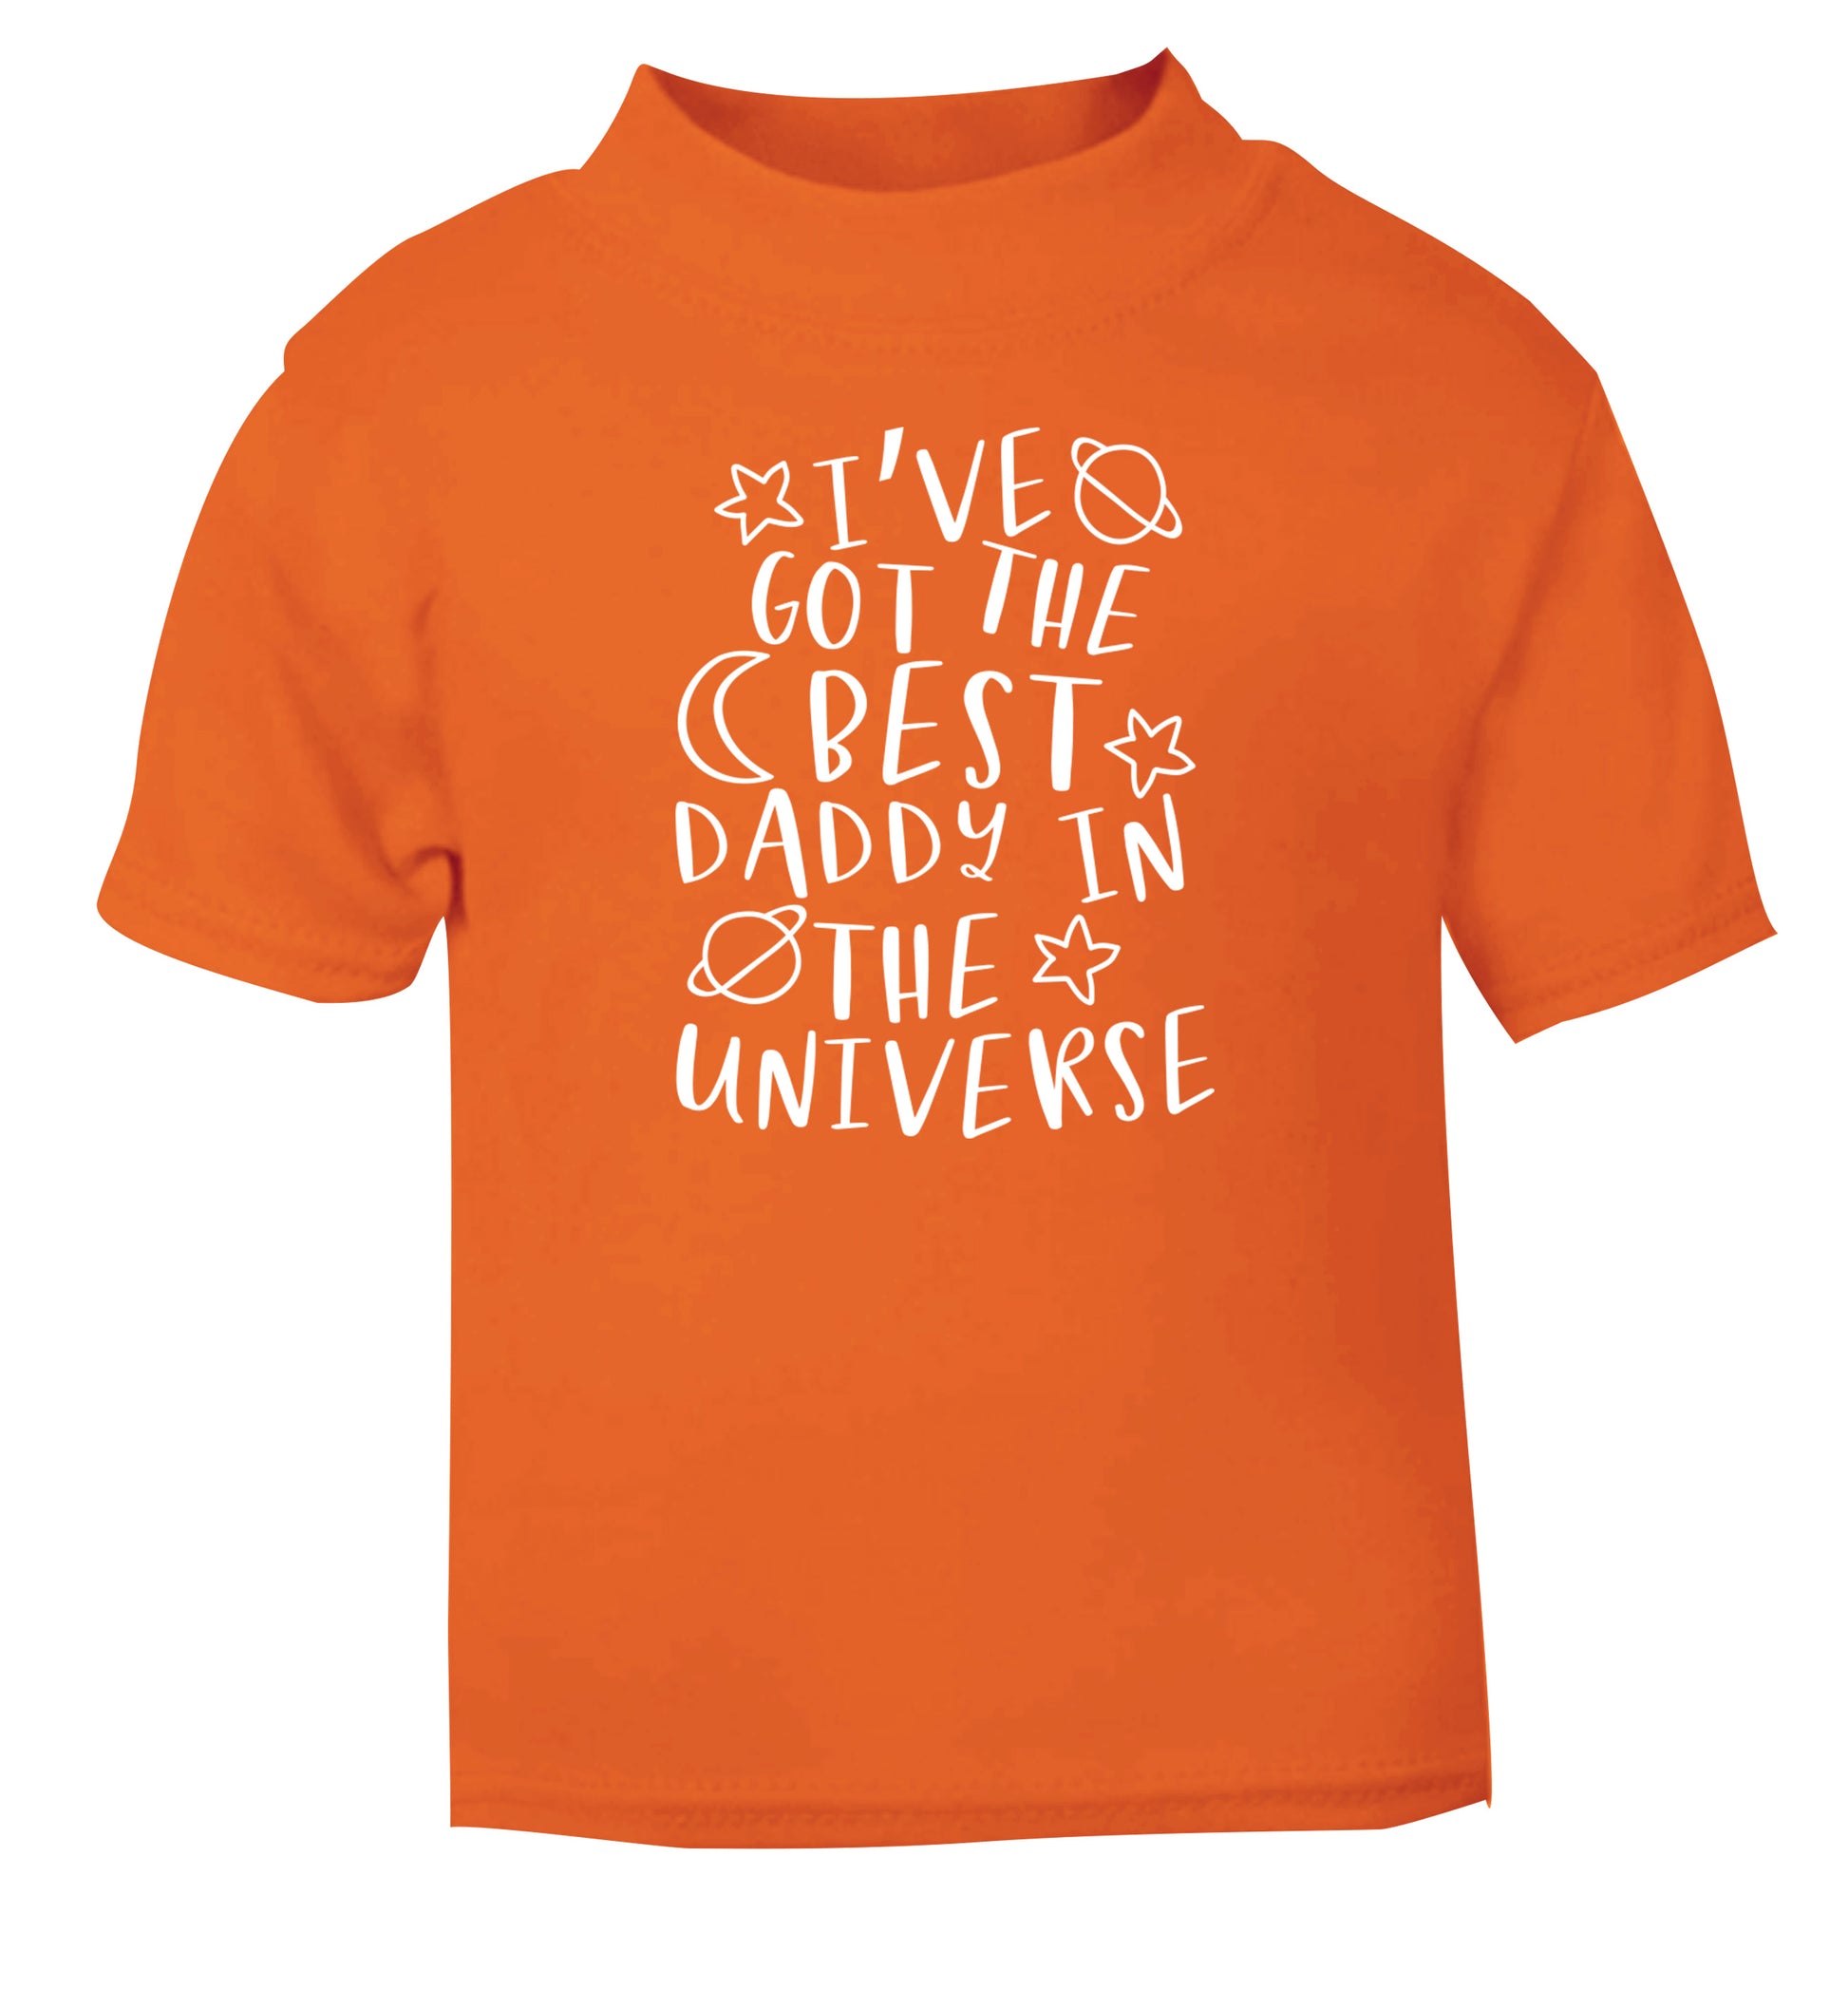 I've got the best daddy in the universe orange Baby Toddler Tshirt 2 Years